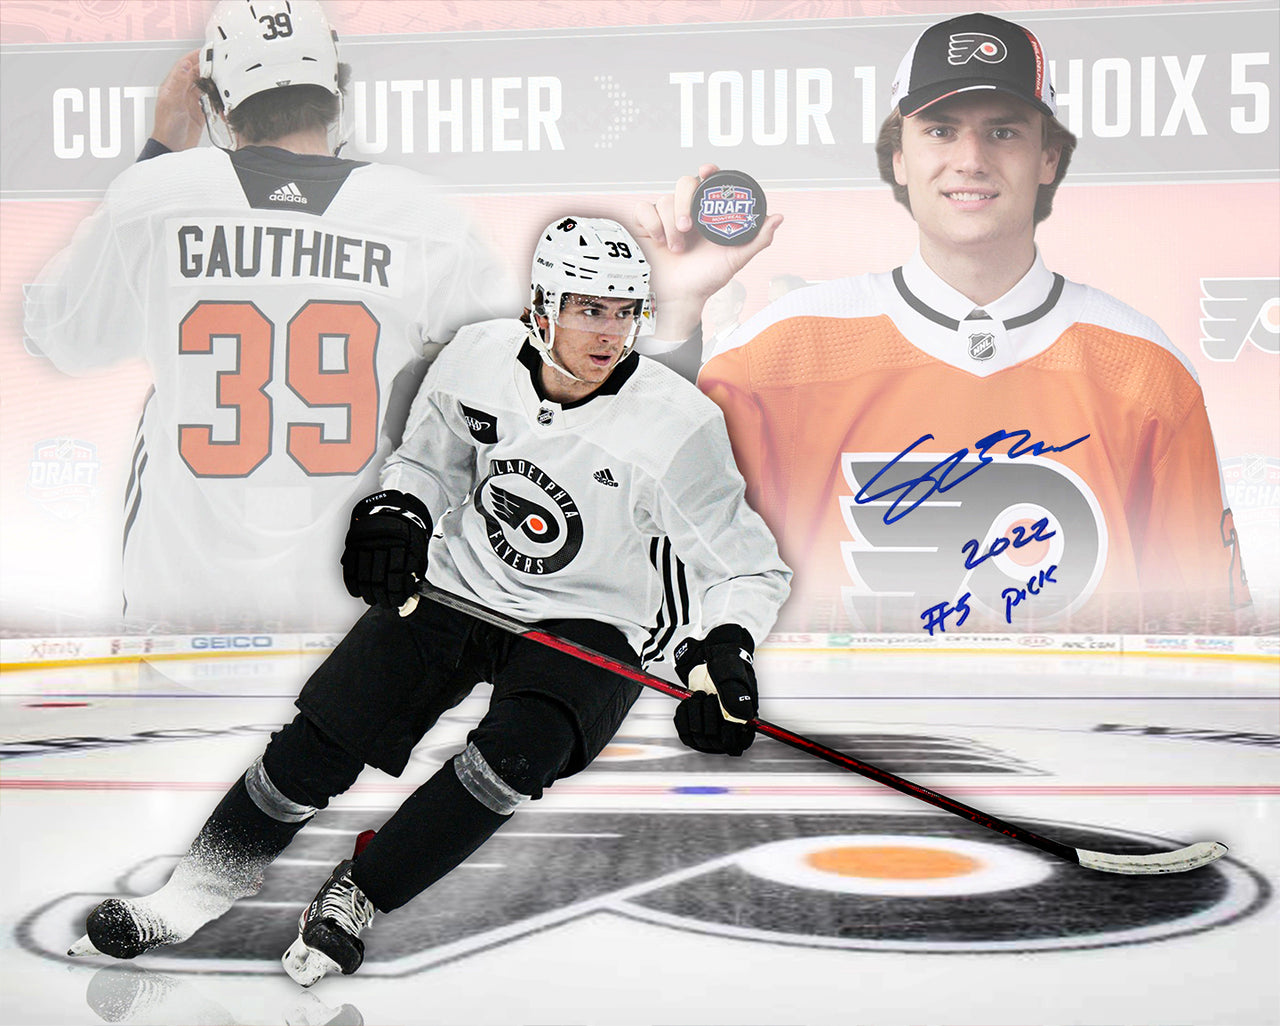 Cutter Gauthier Philadelphia Flyers Autographed 16x20 Draft Hockey Collage Photo Inscribed #5 Pick - Dynasty Sports & Framing 